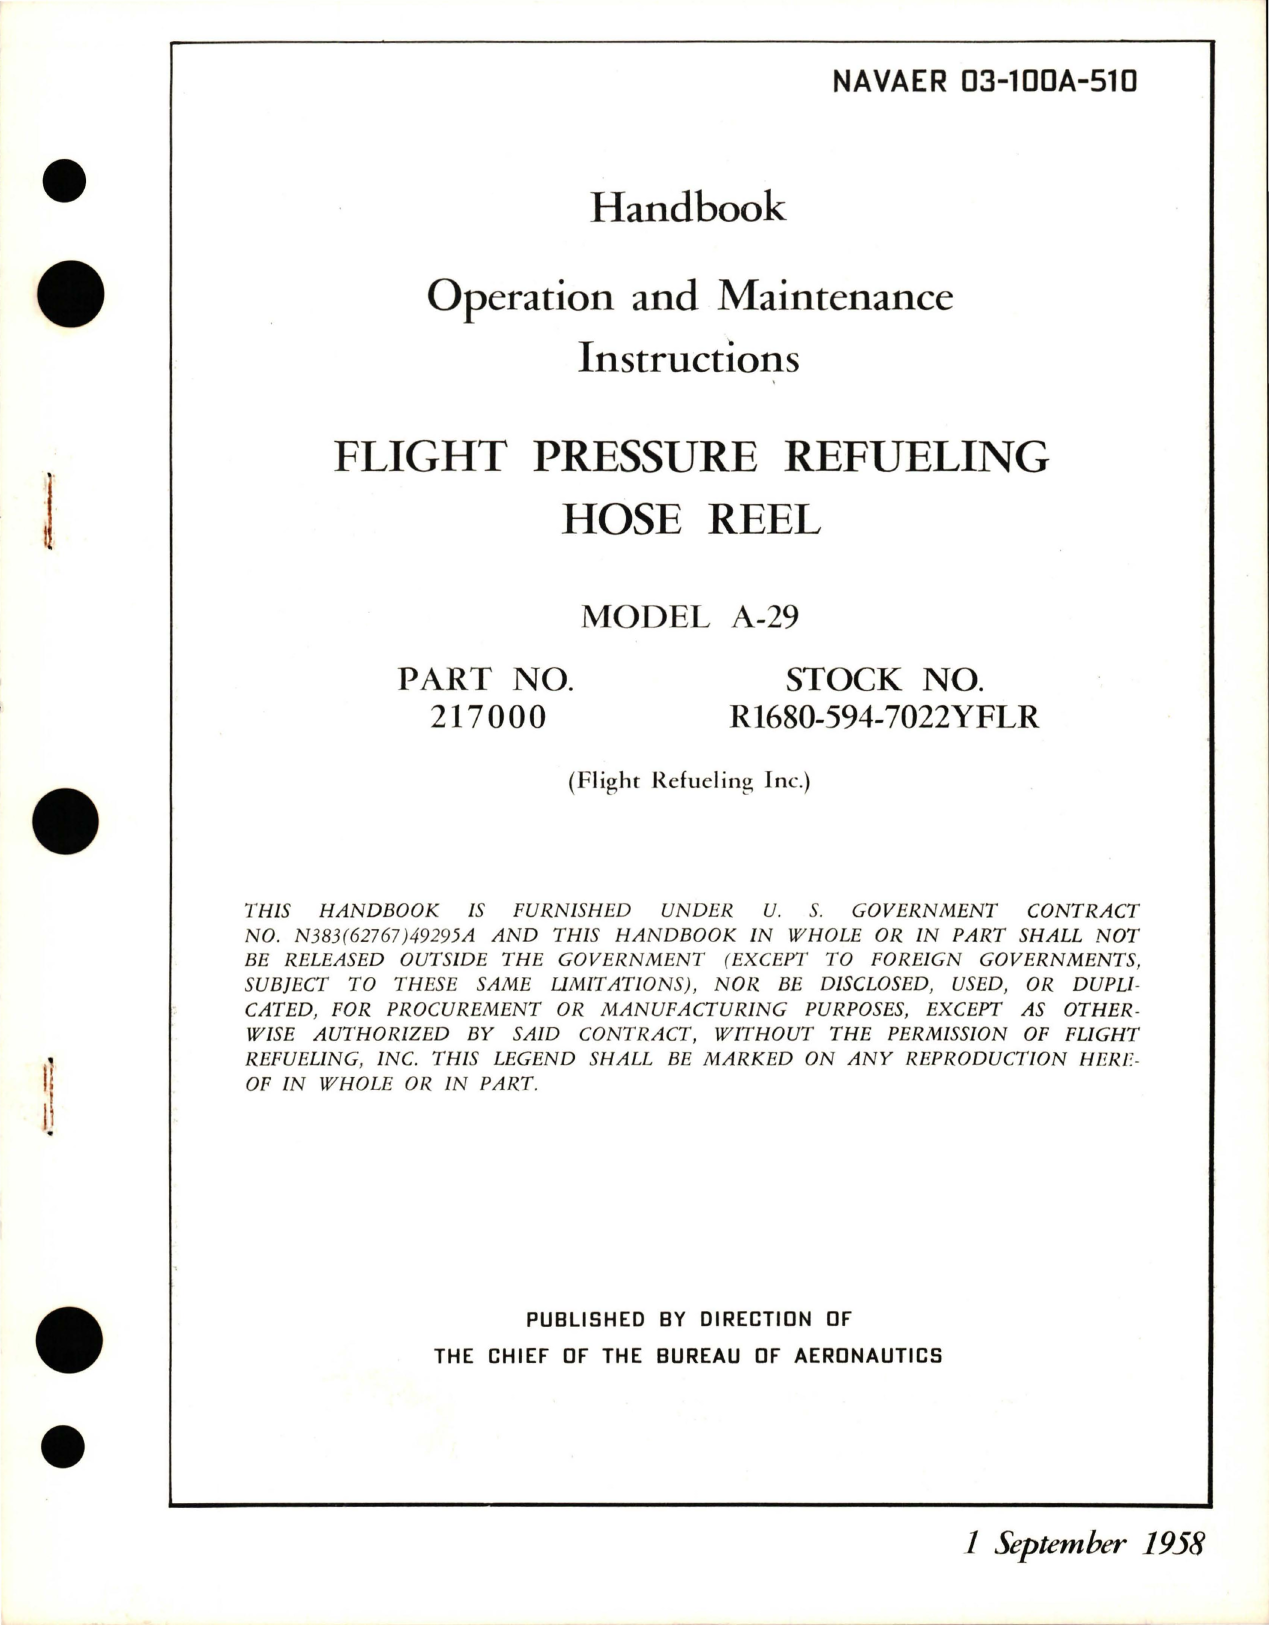 Sample page 1 from AirCorps Library document: Operation and Maintenance Instructions for Flight Pressure Refueling Hose Reel - Model A-29 - Part 217000